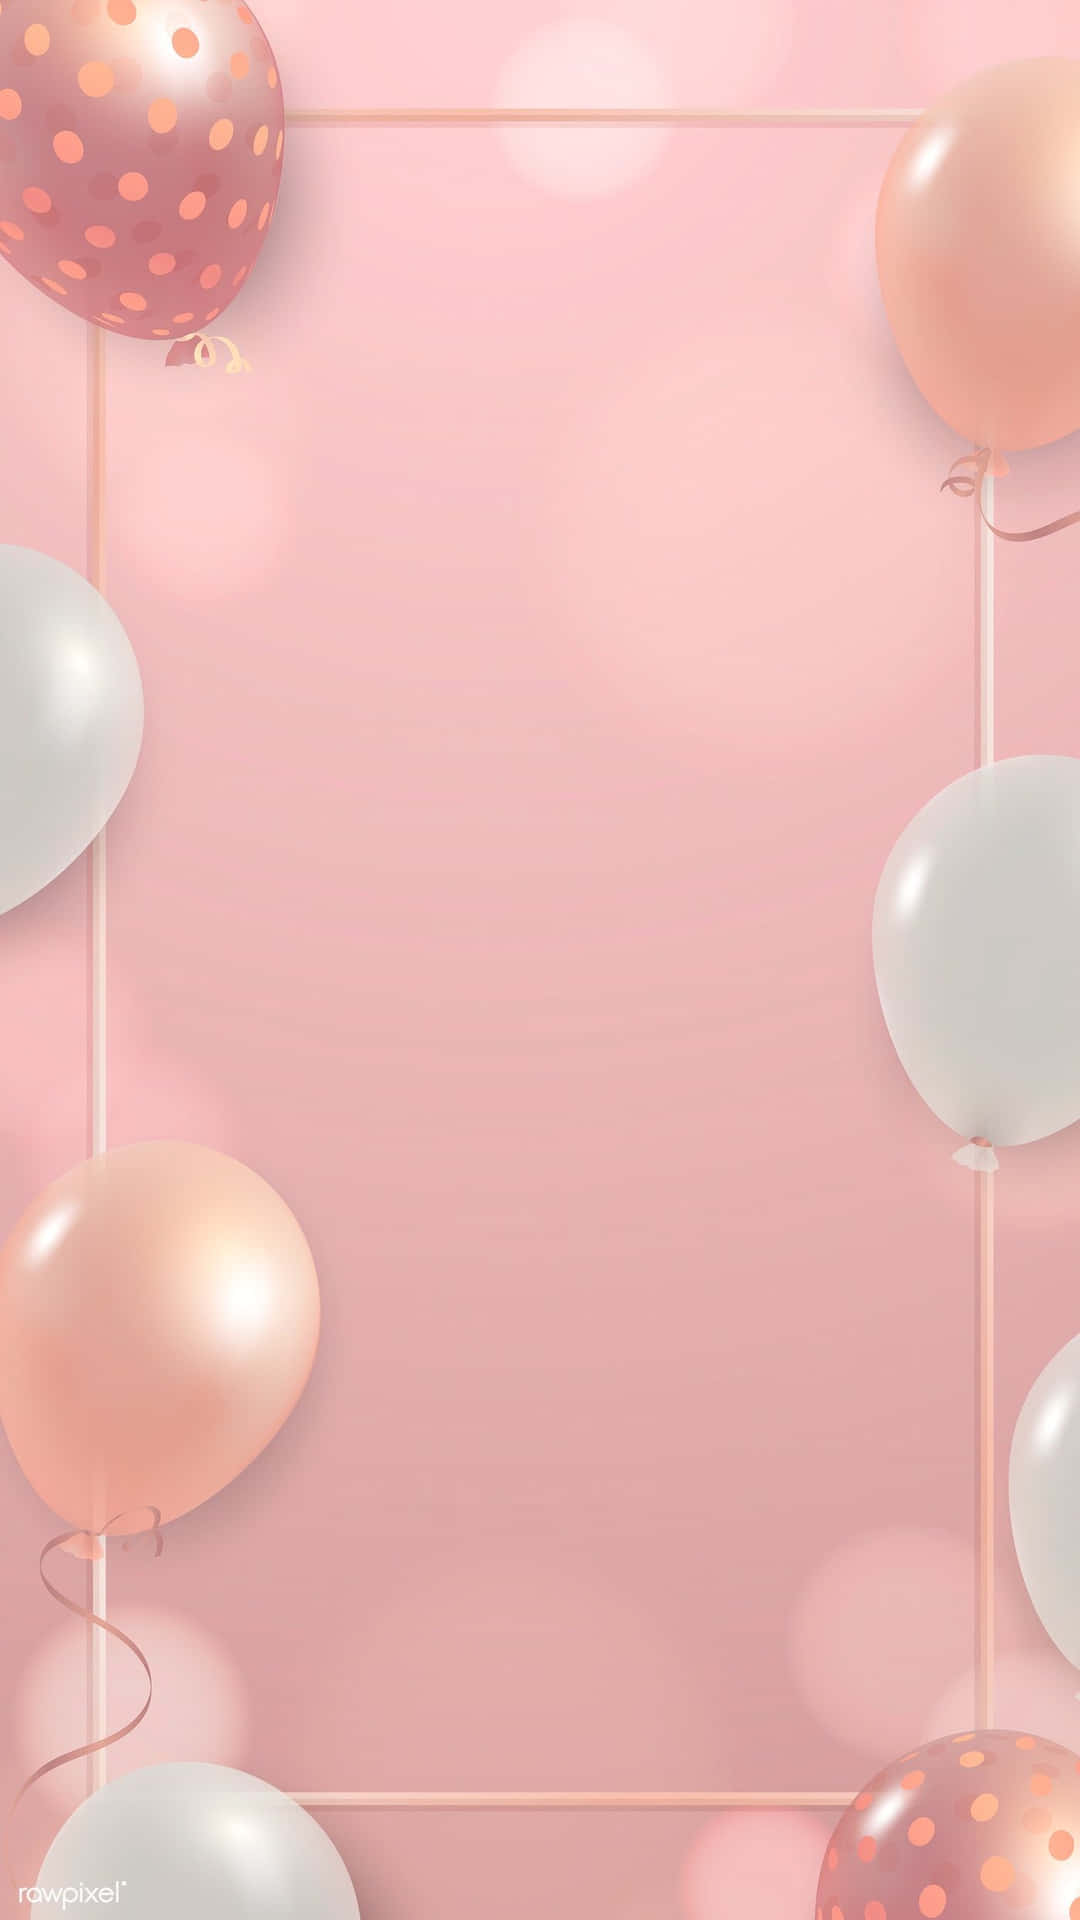 Celebrate with fun, colour and the gentle rise of pink balloons!